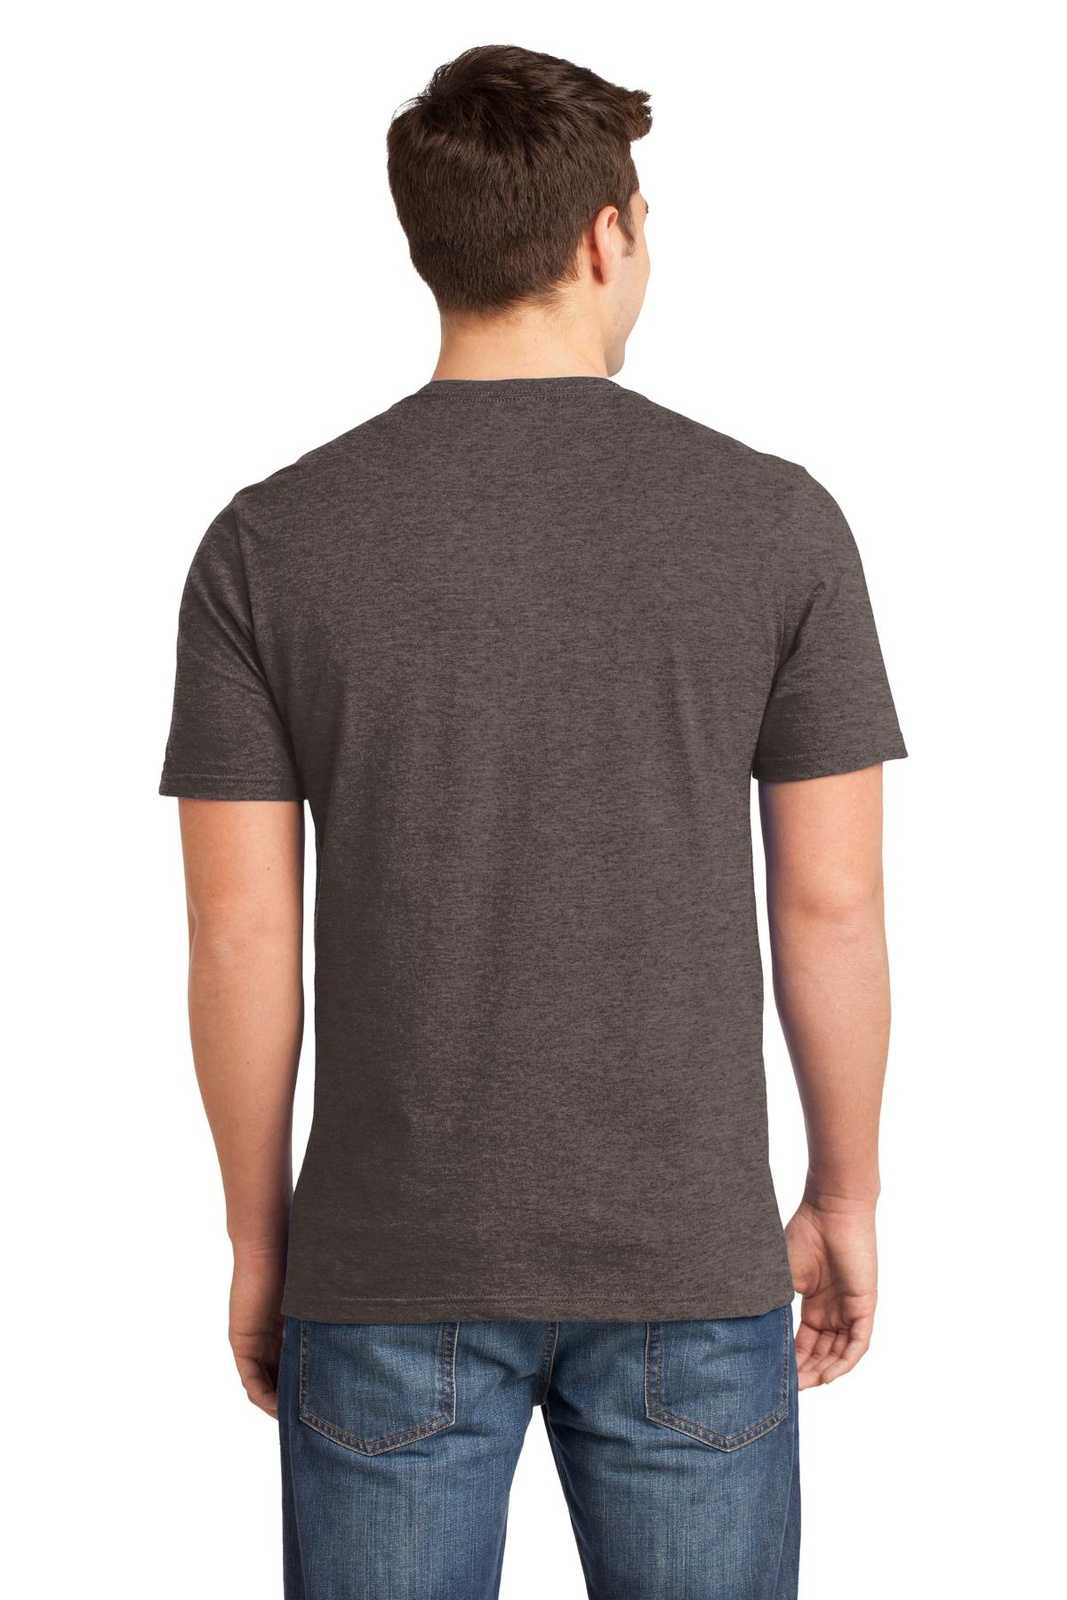 District DT6000 Very Important Tee - Heathered Brown - HIT a Double - 2